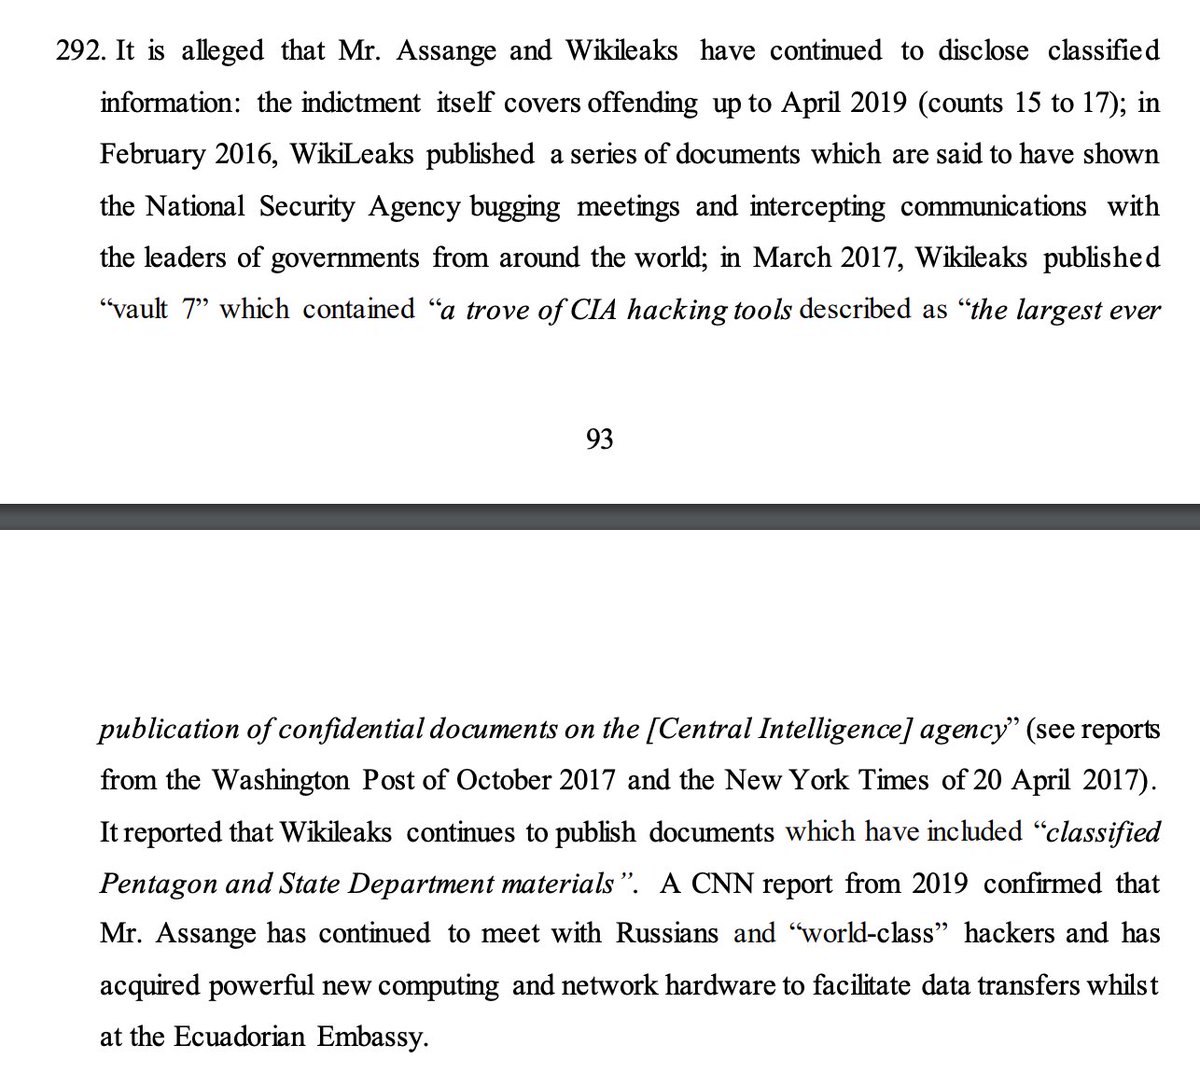 As mentioned, Baraitser went beyond the record before her on several occasions, in part to consider the import of Vault 7. Here, it worked in favor of Assange, bc it's how she blew off USG [empty] assurances that Assange might not be subject to SAMs.